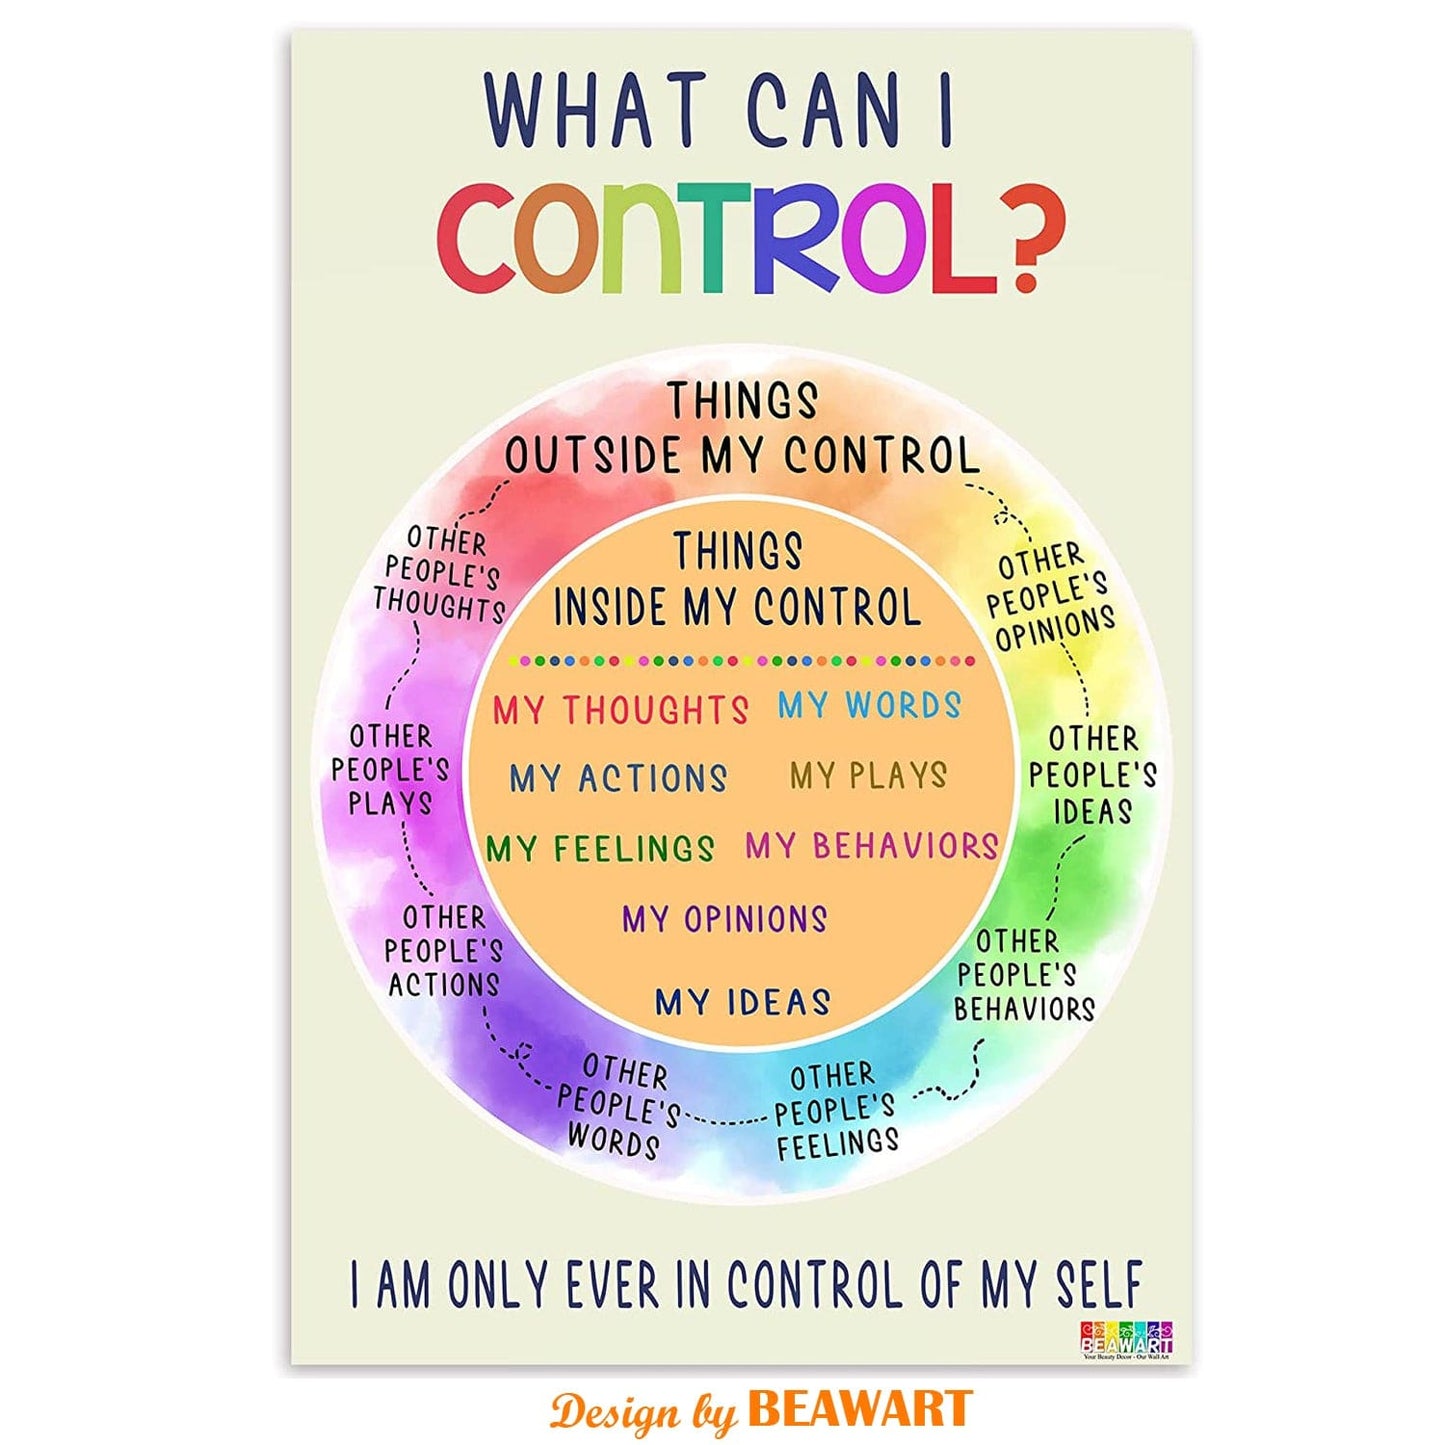 What Can I Control Poster - Circle Of Control Canvas Wall Art (12X18 Inches) - BEAWART